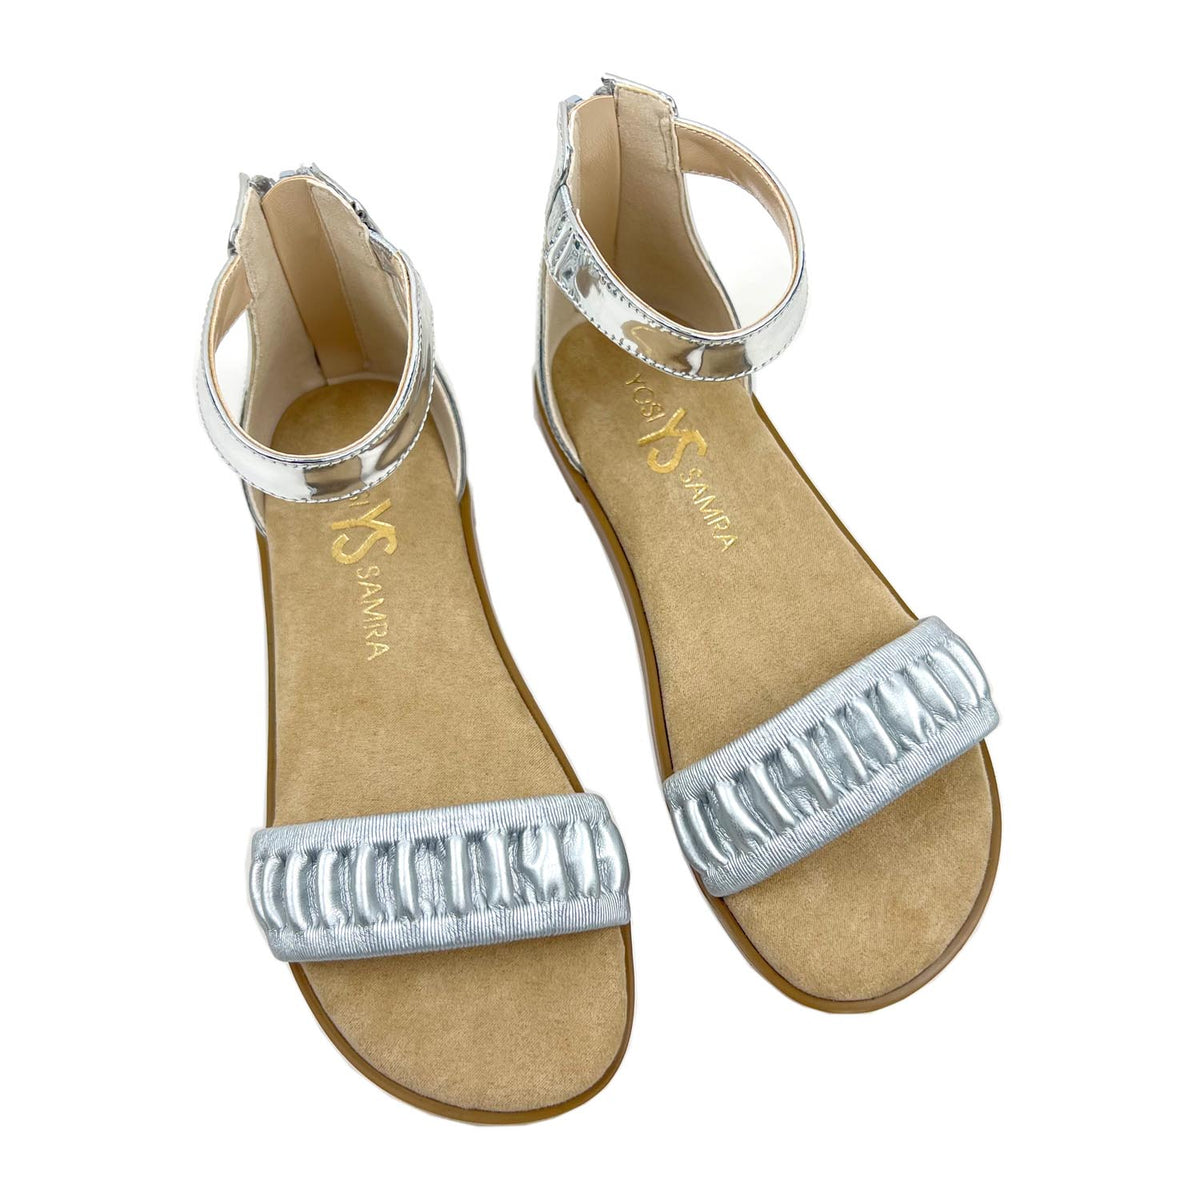 Miss Cambelle Ruffle Sandal in Silver - Kids